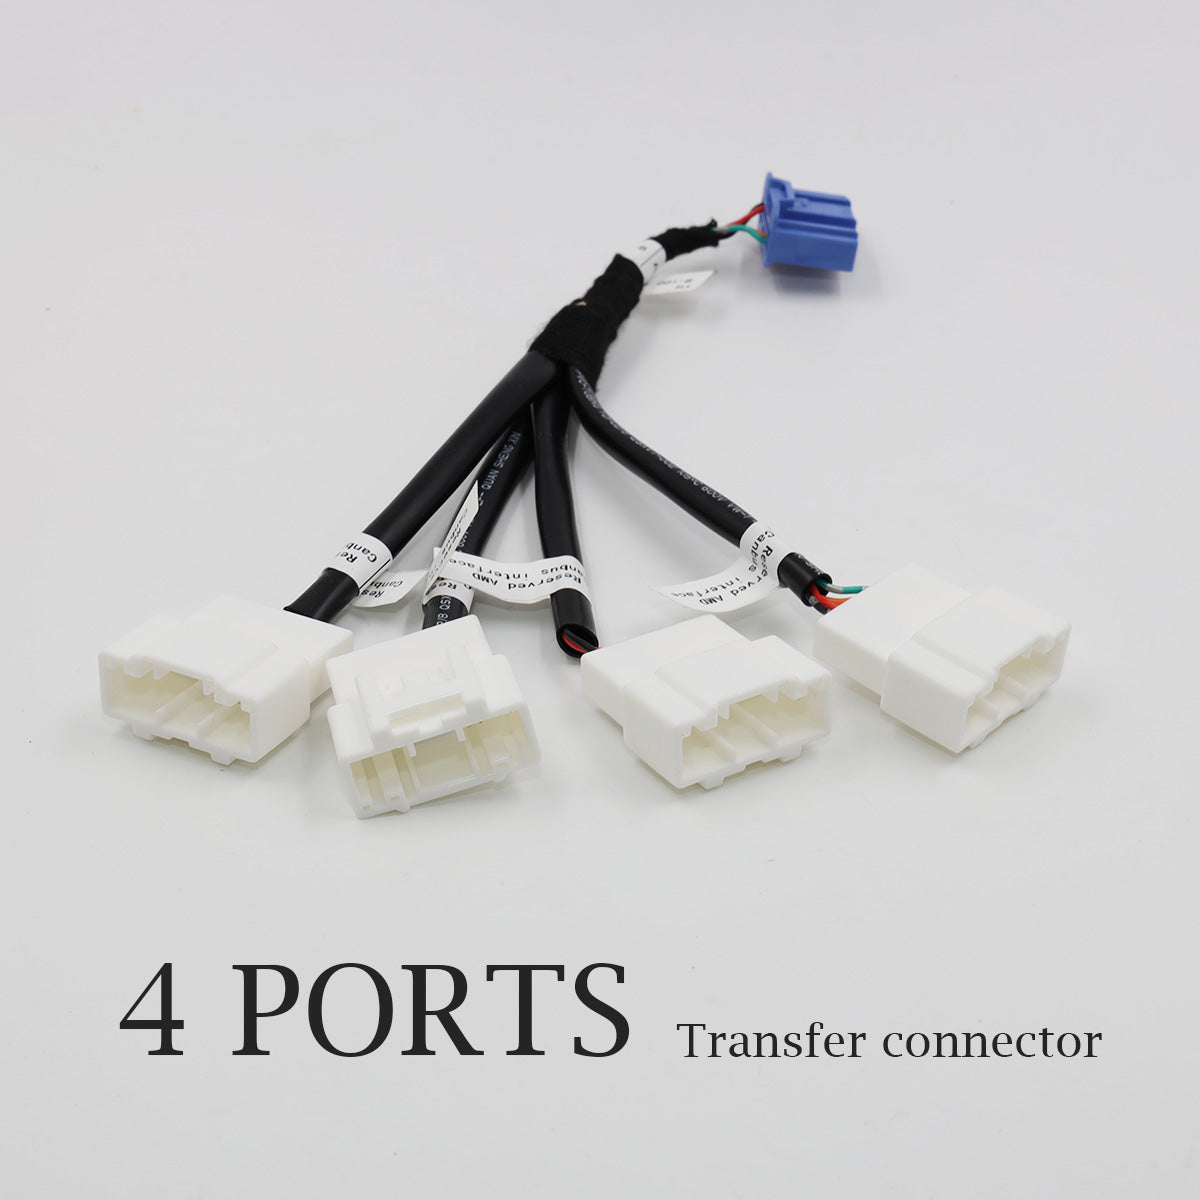 Modell 3 &amp; Y 4 Ports AMD Port Transfer Connector